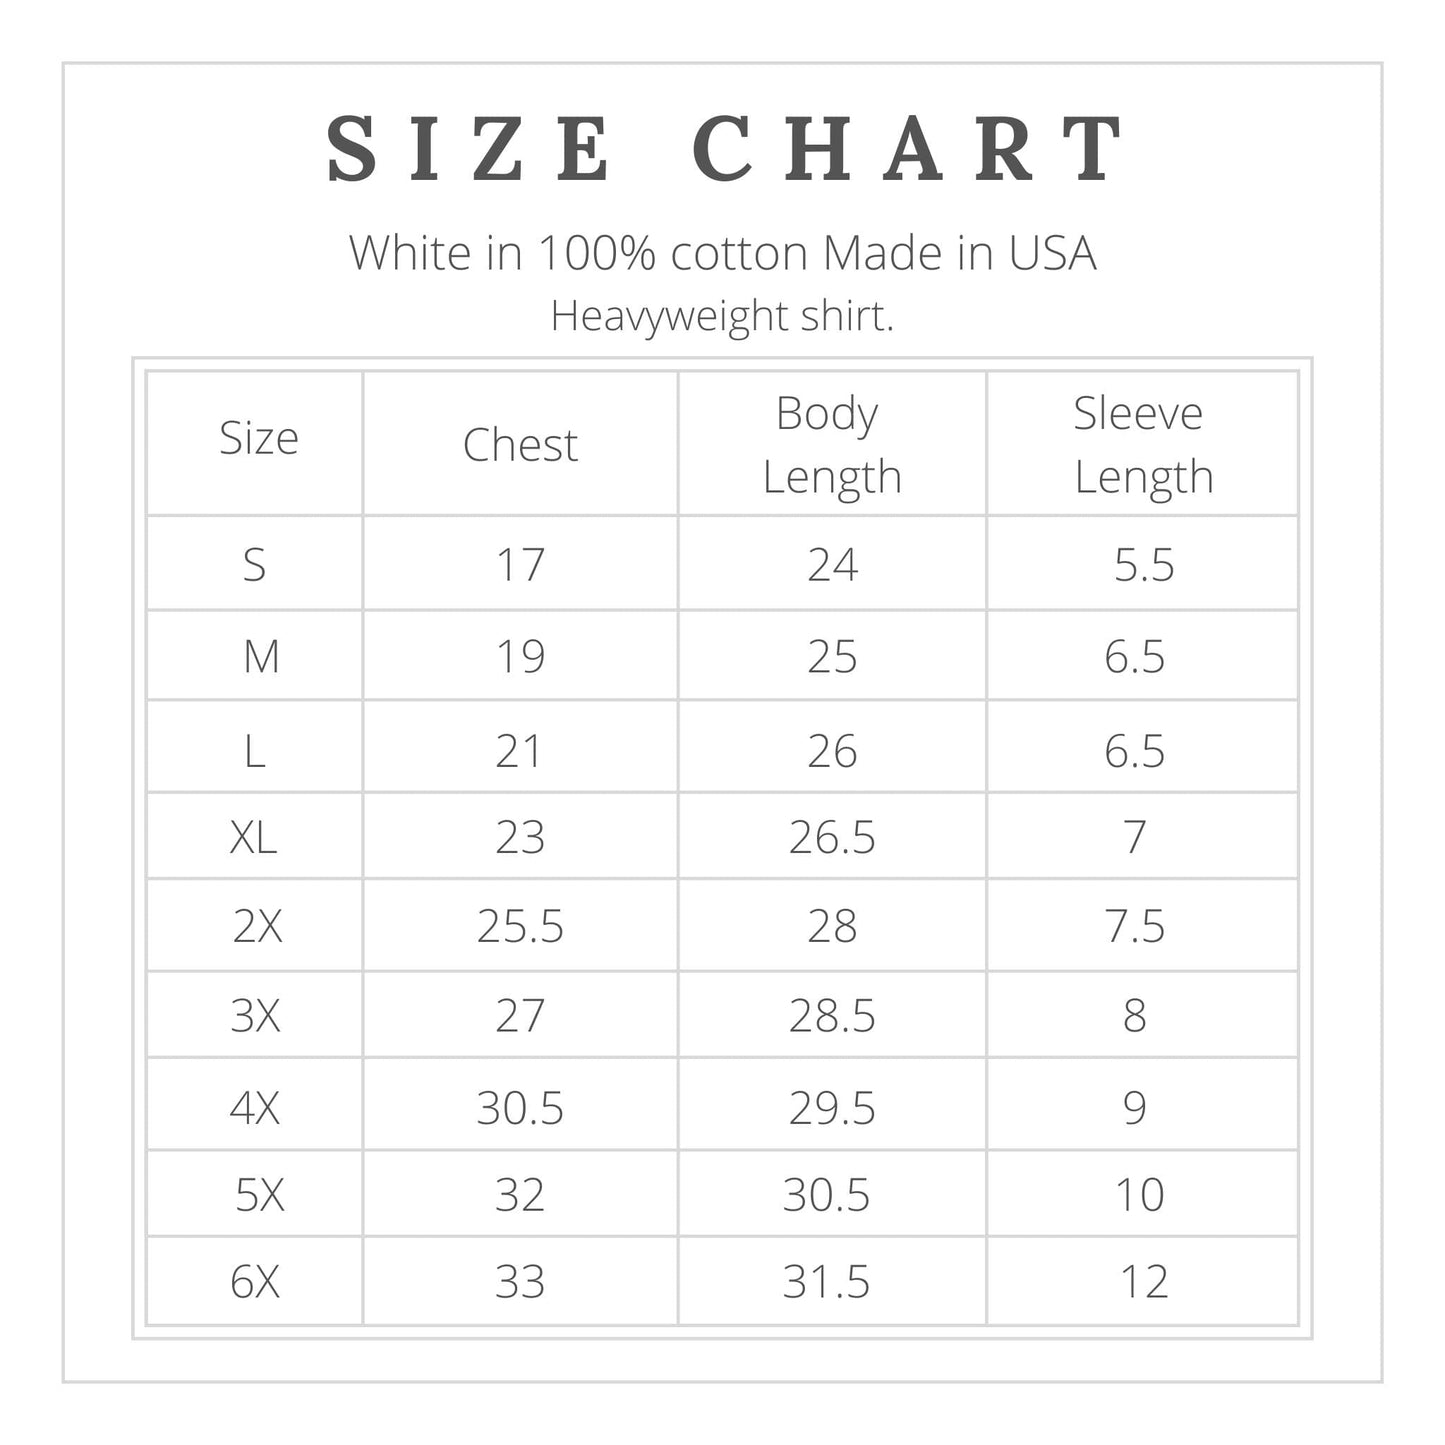 Size chart of the Made in USA shirt of 